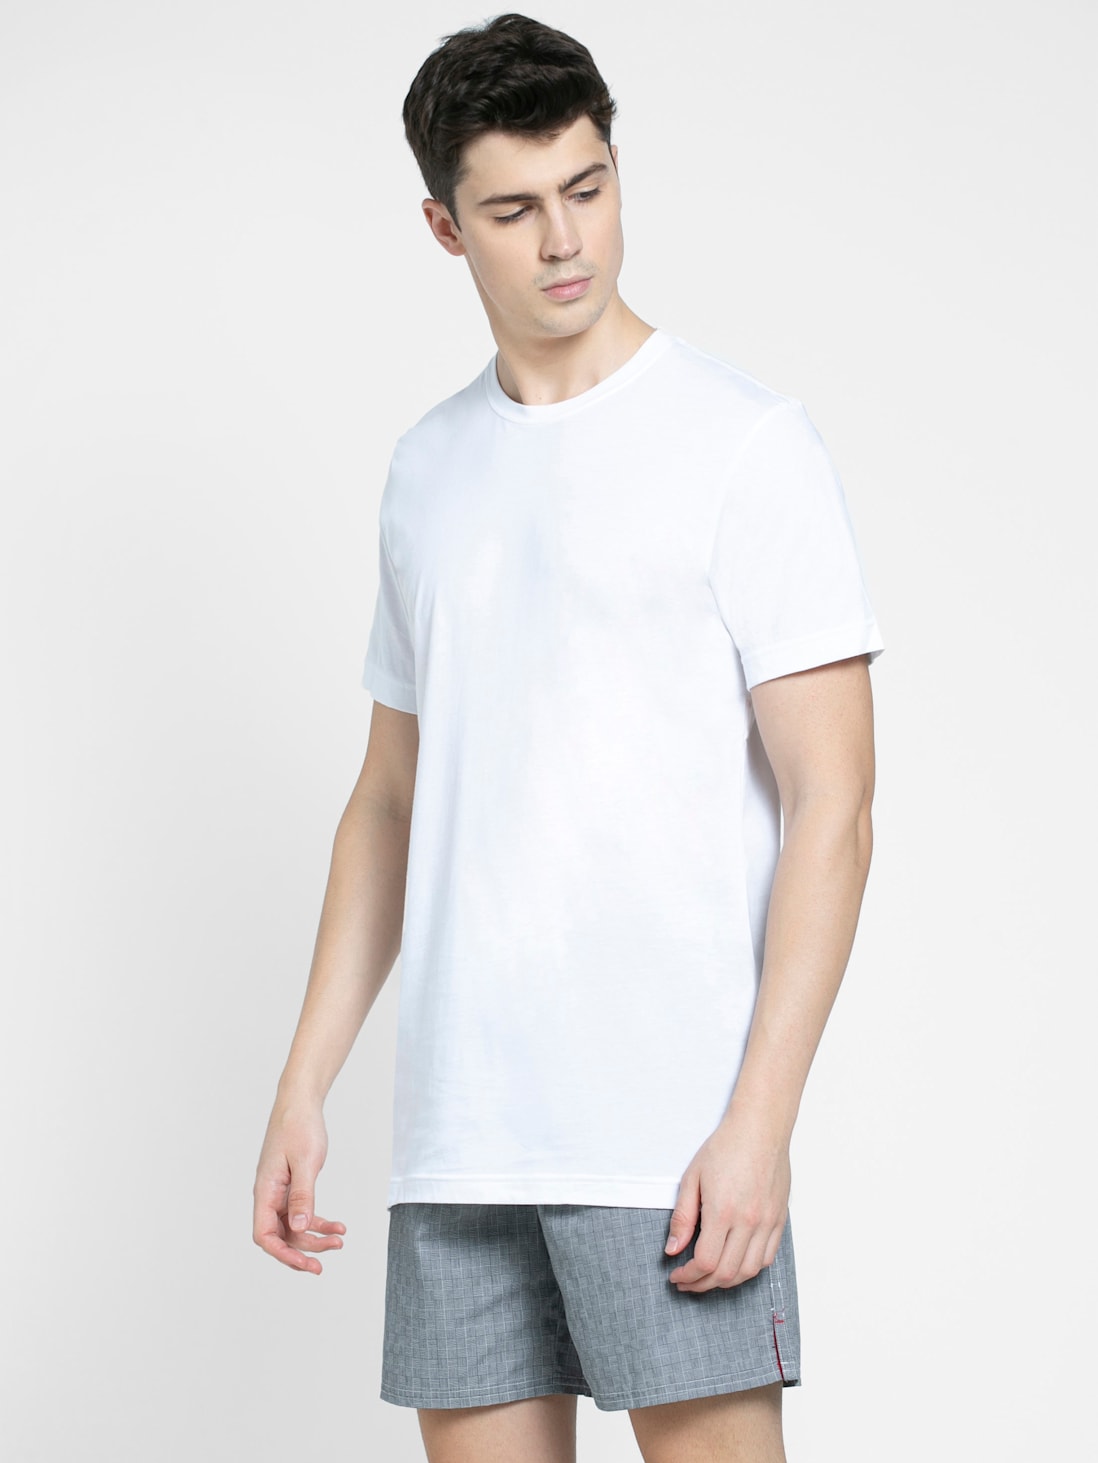 Buy Men's Super Combed Cotton Sleeved Inner T-Shirt with Extended ...